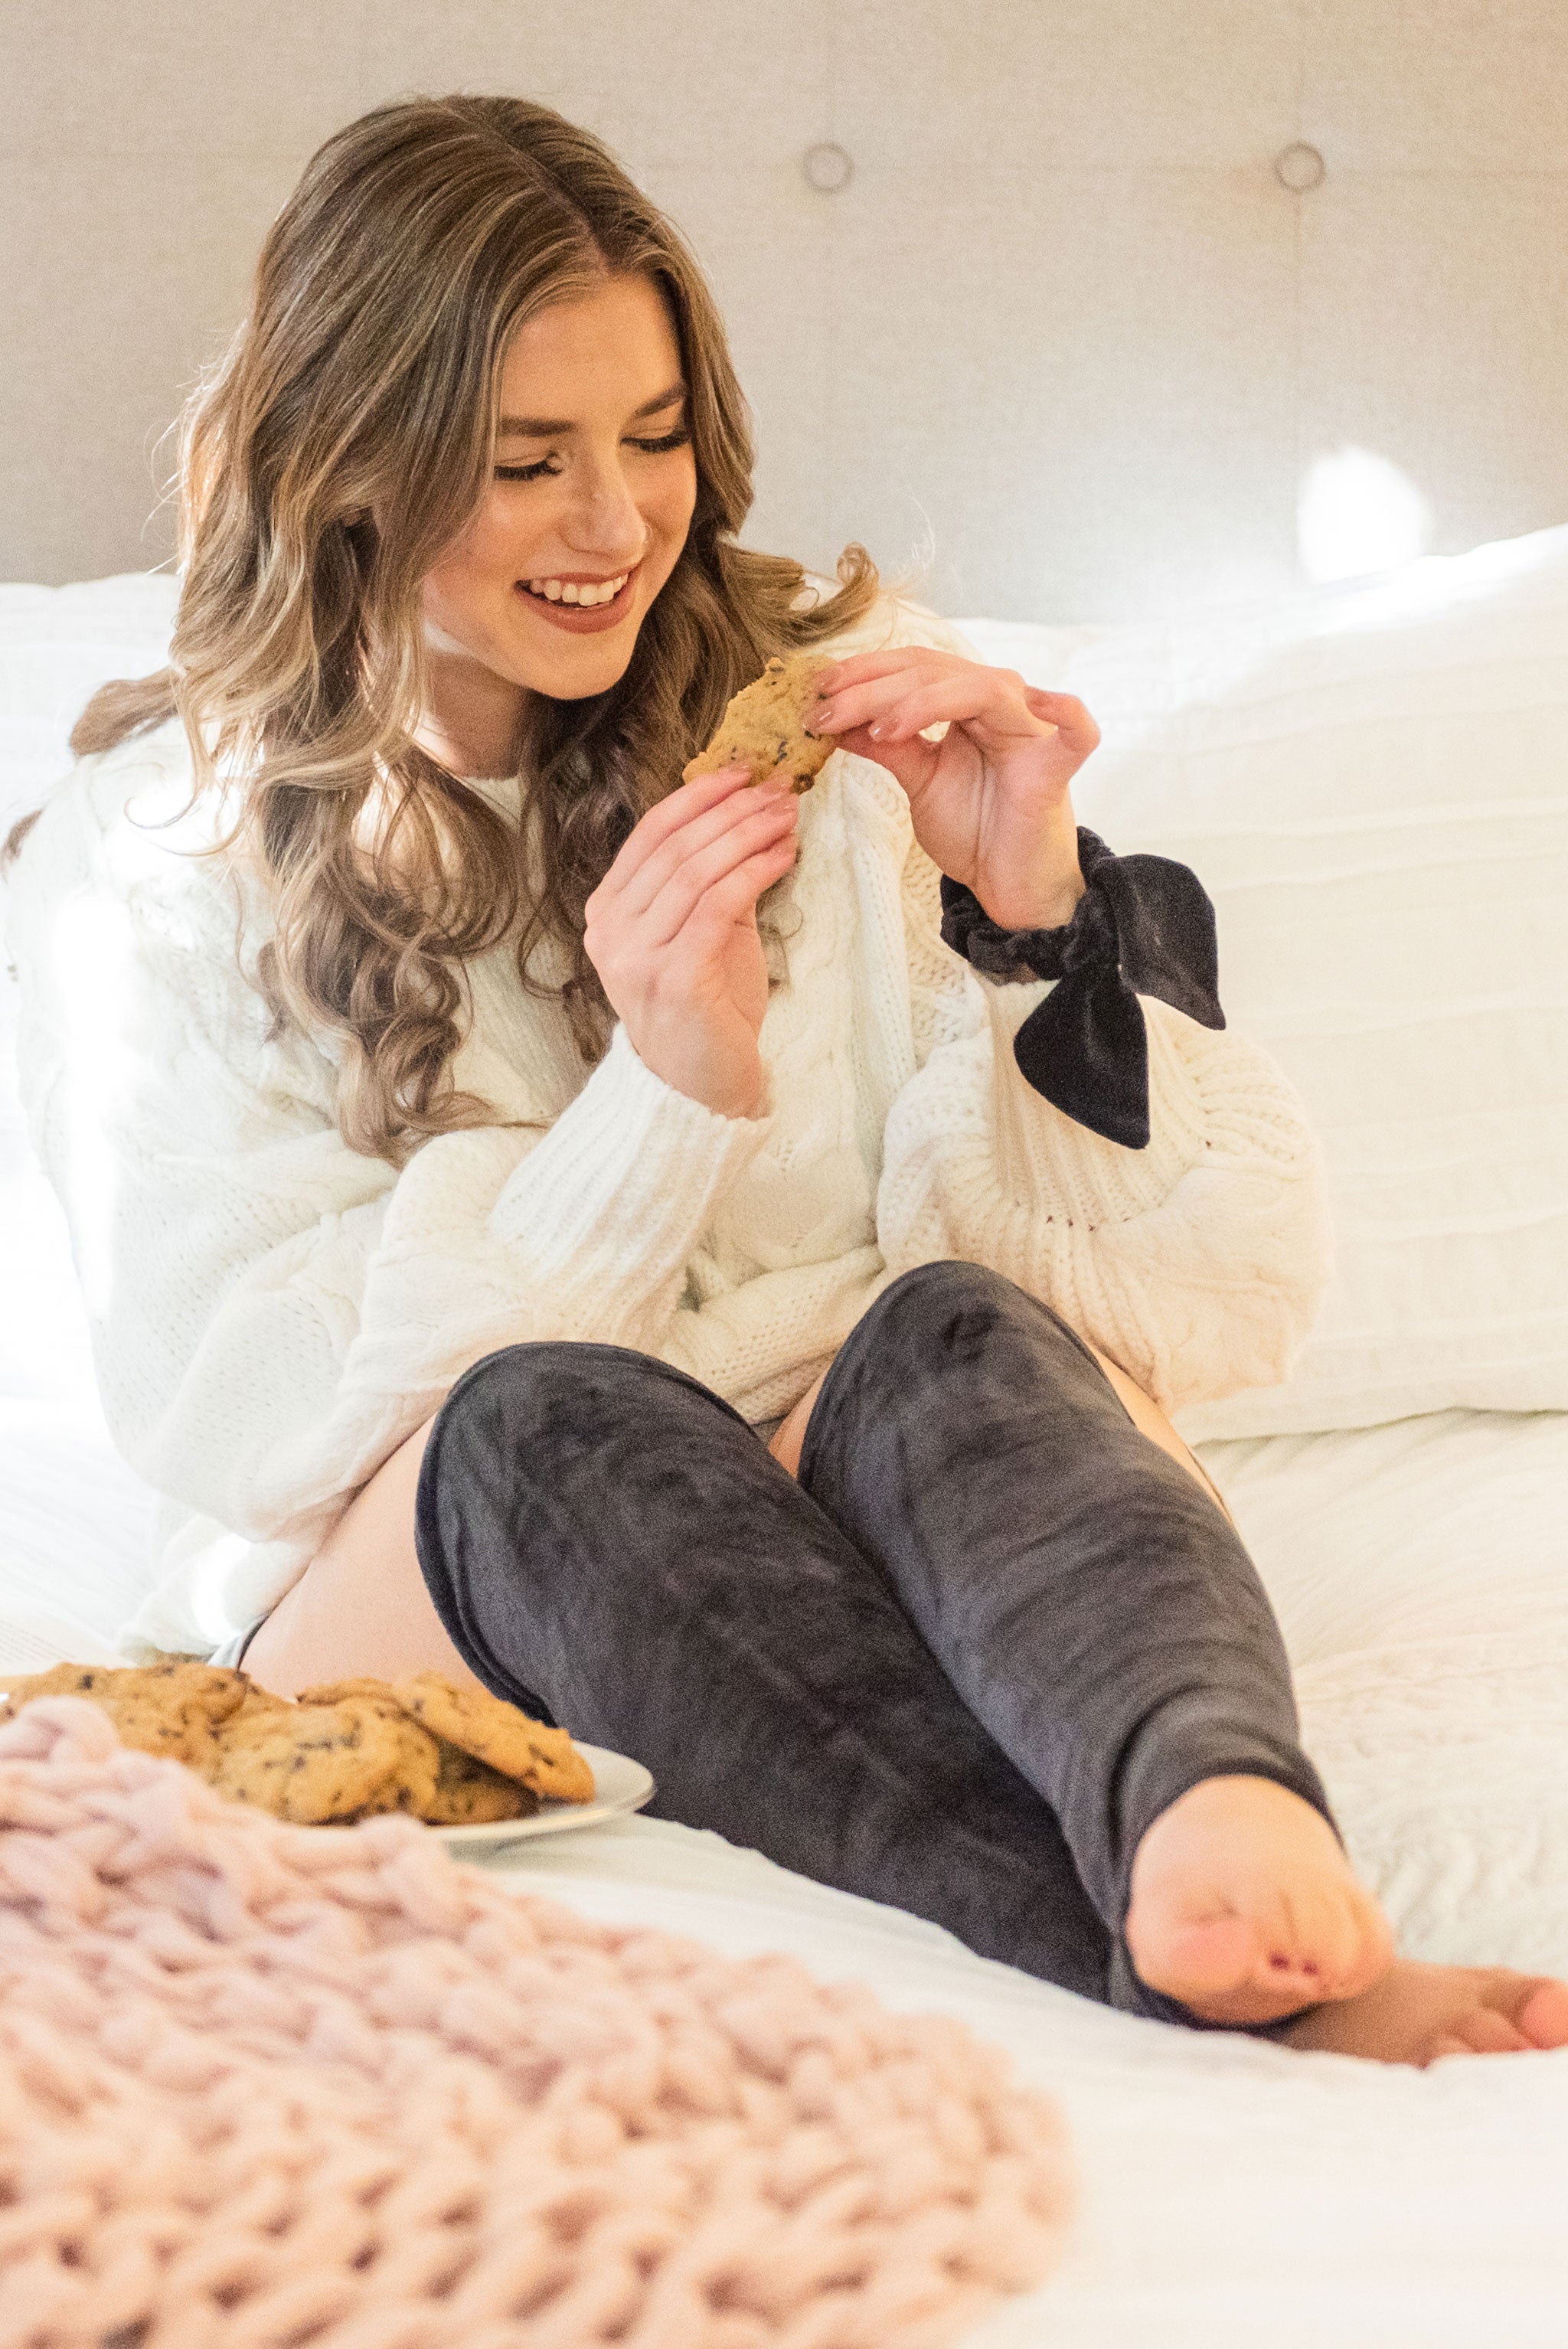 A smiling woman sits on a bed with white bedding. She is wearing a white chunky knit sweater and black velvet leg warmers. She is wearing a bow hair scrunchie on her left wrist. She is holding a partially eaten cookie about to take another bite. A plate of cookies and pink chunky knit blanket are on the bed next to her..